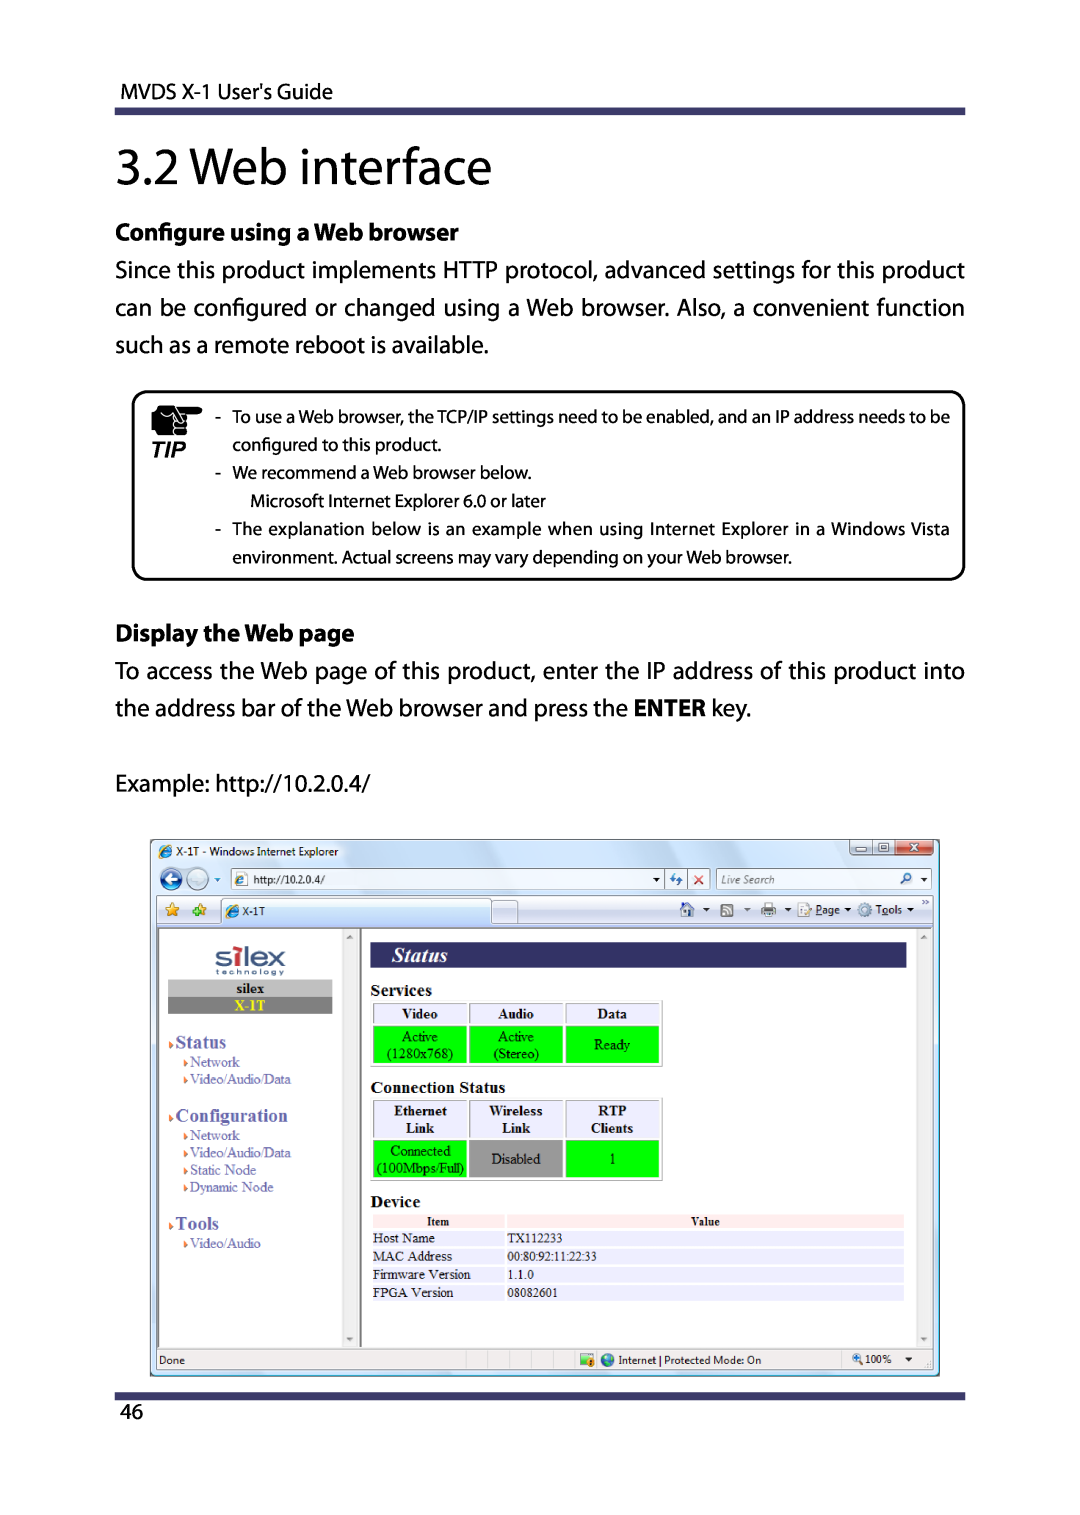 Silex technology MVDS X-1 manual Web interface, Configure using a Web browser, Display the Web page 